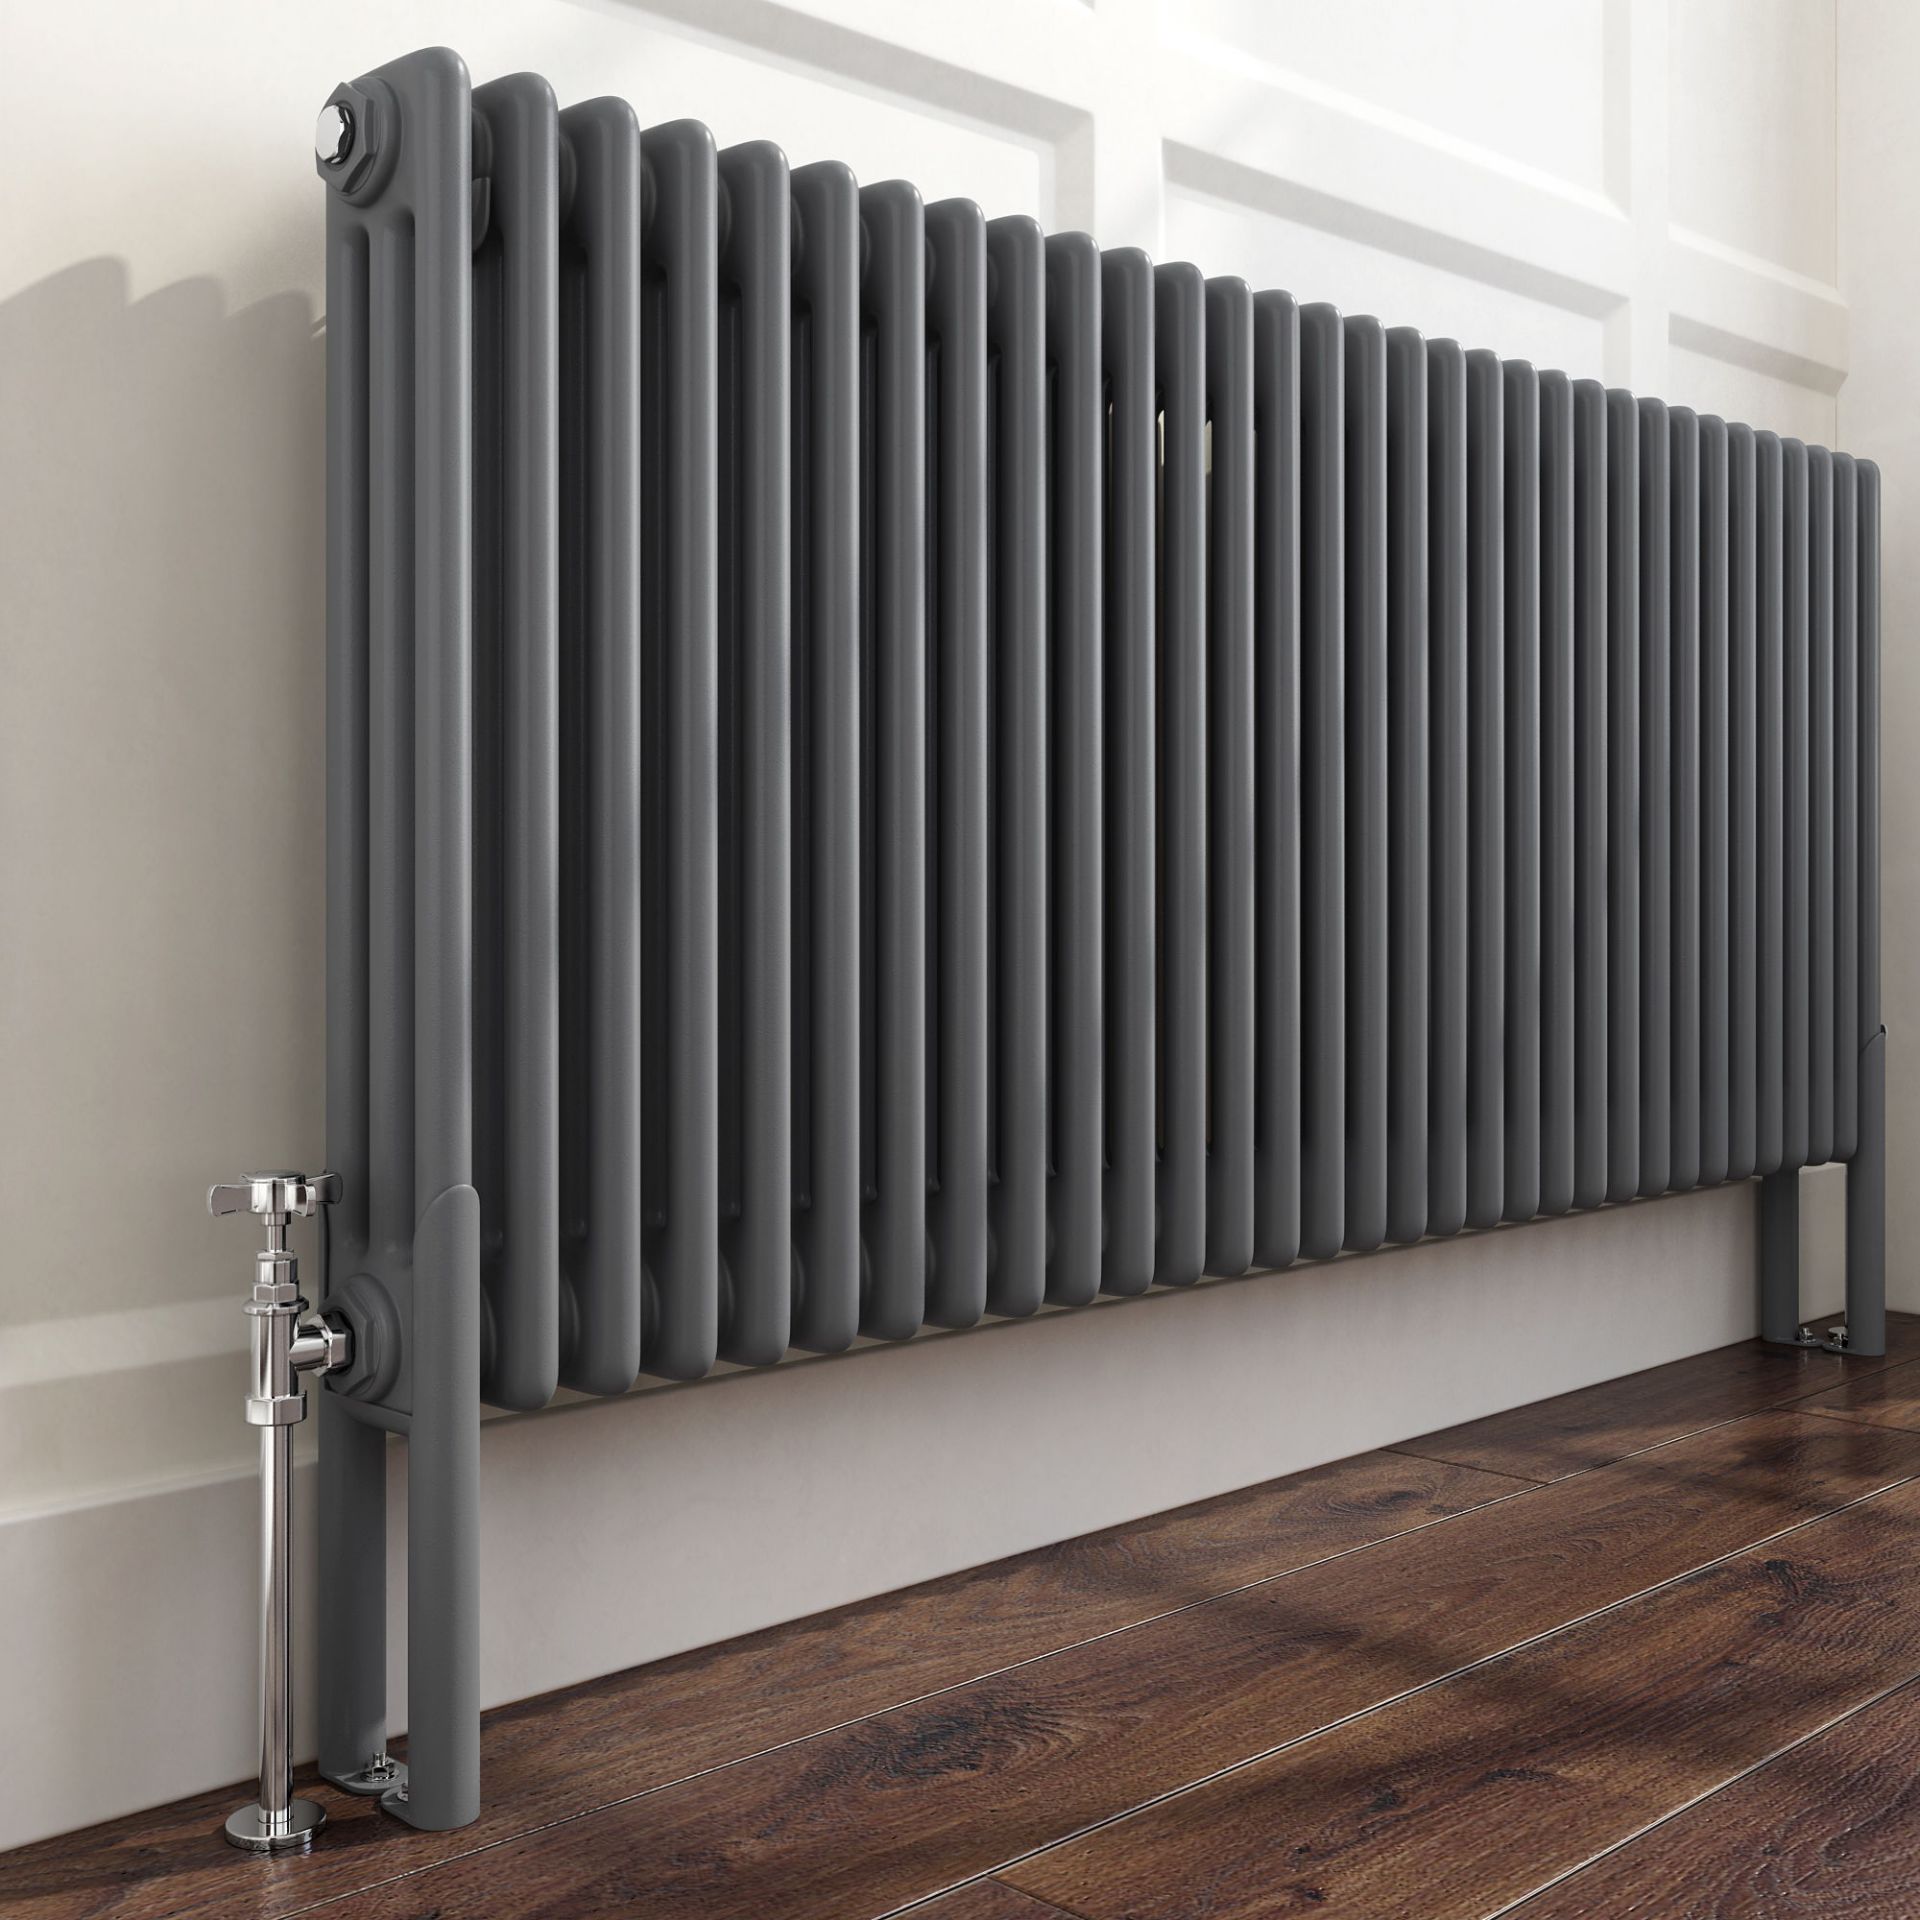 (NK2) 300x102 - Wall Mounting Feet For 3 Bar Radiators - Anthracite Can be used to floor mount - Image 2 of 3